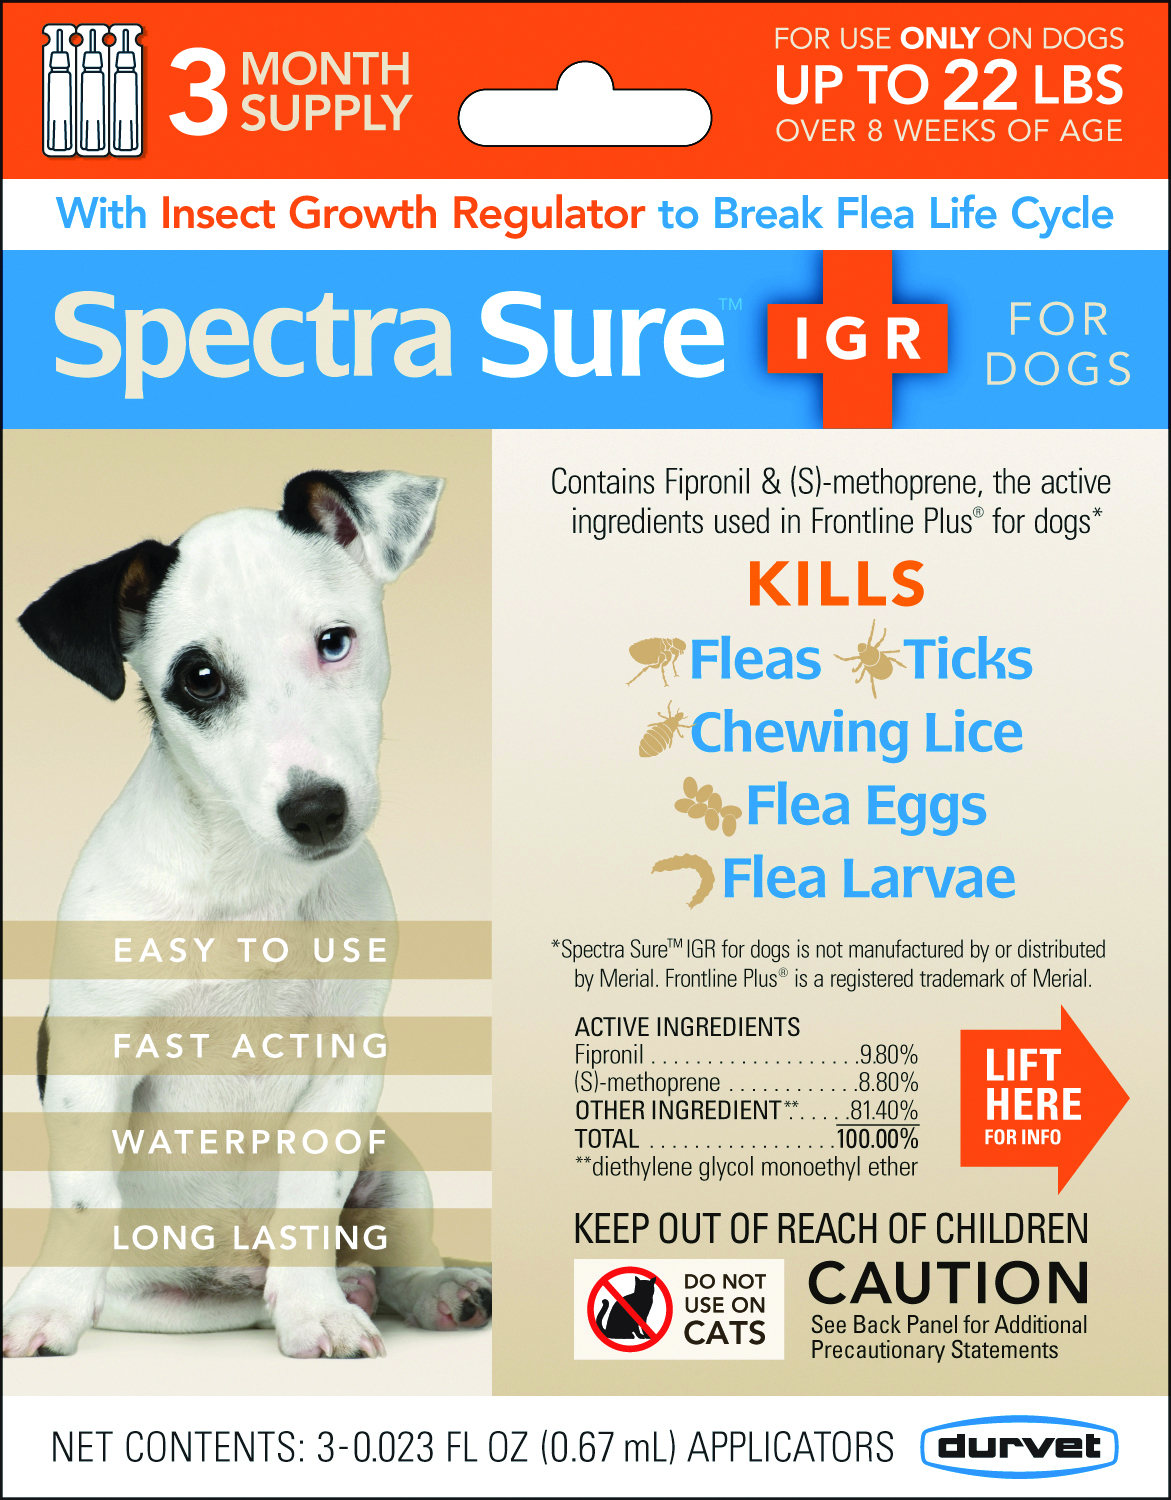 SPECTRA SURE IGR FOR DOGS